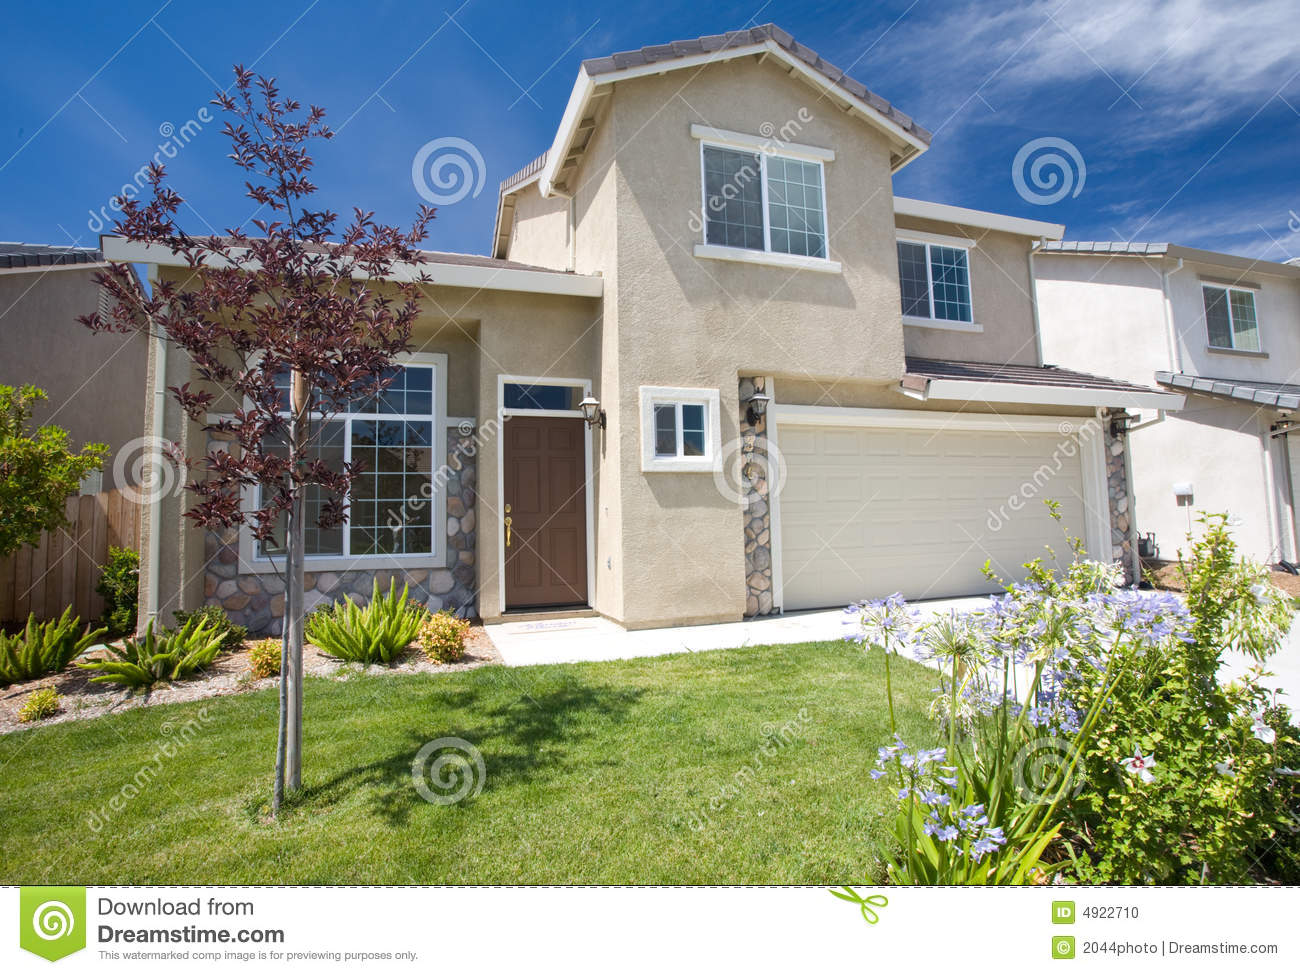 Residential Home Exterior Front With Landscaping Stock Photo   Image    